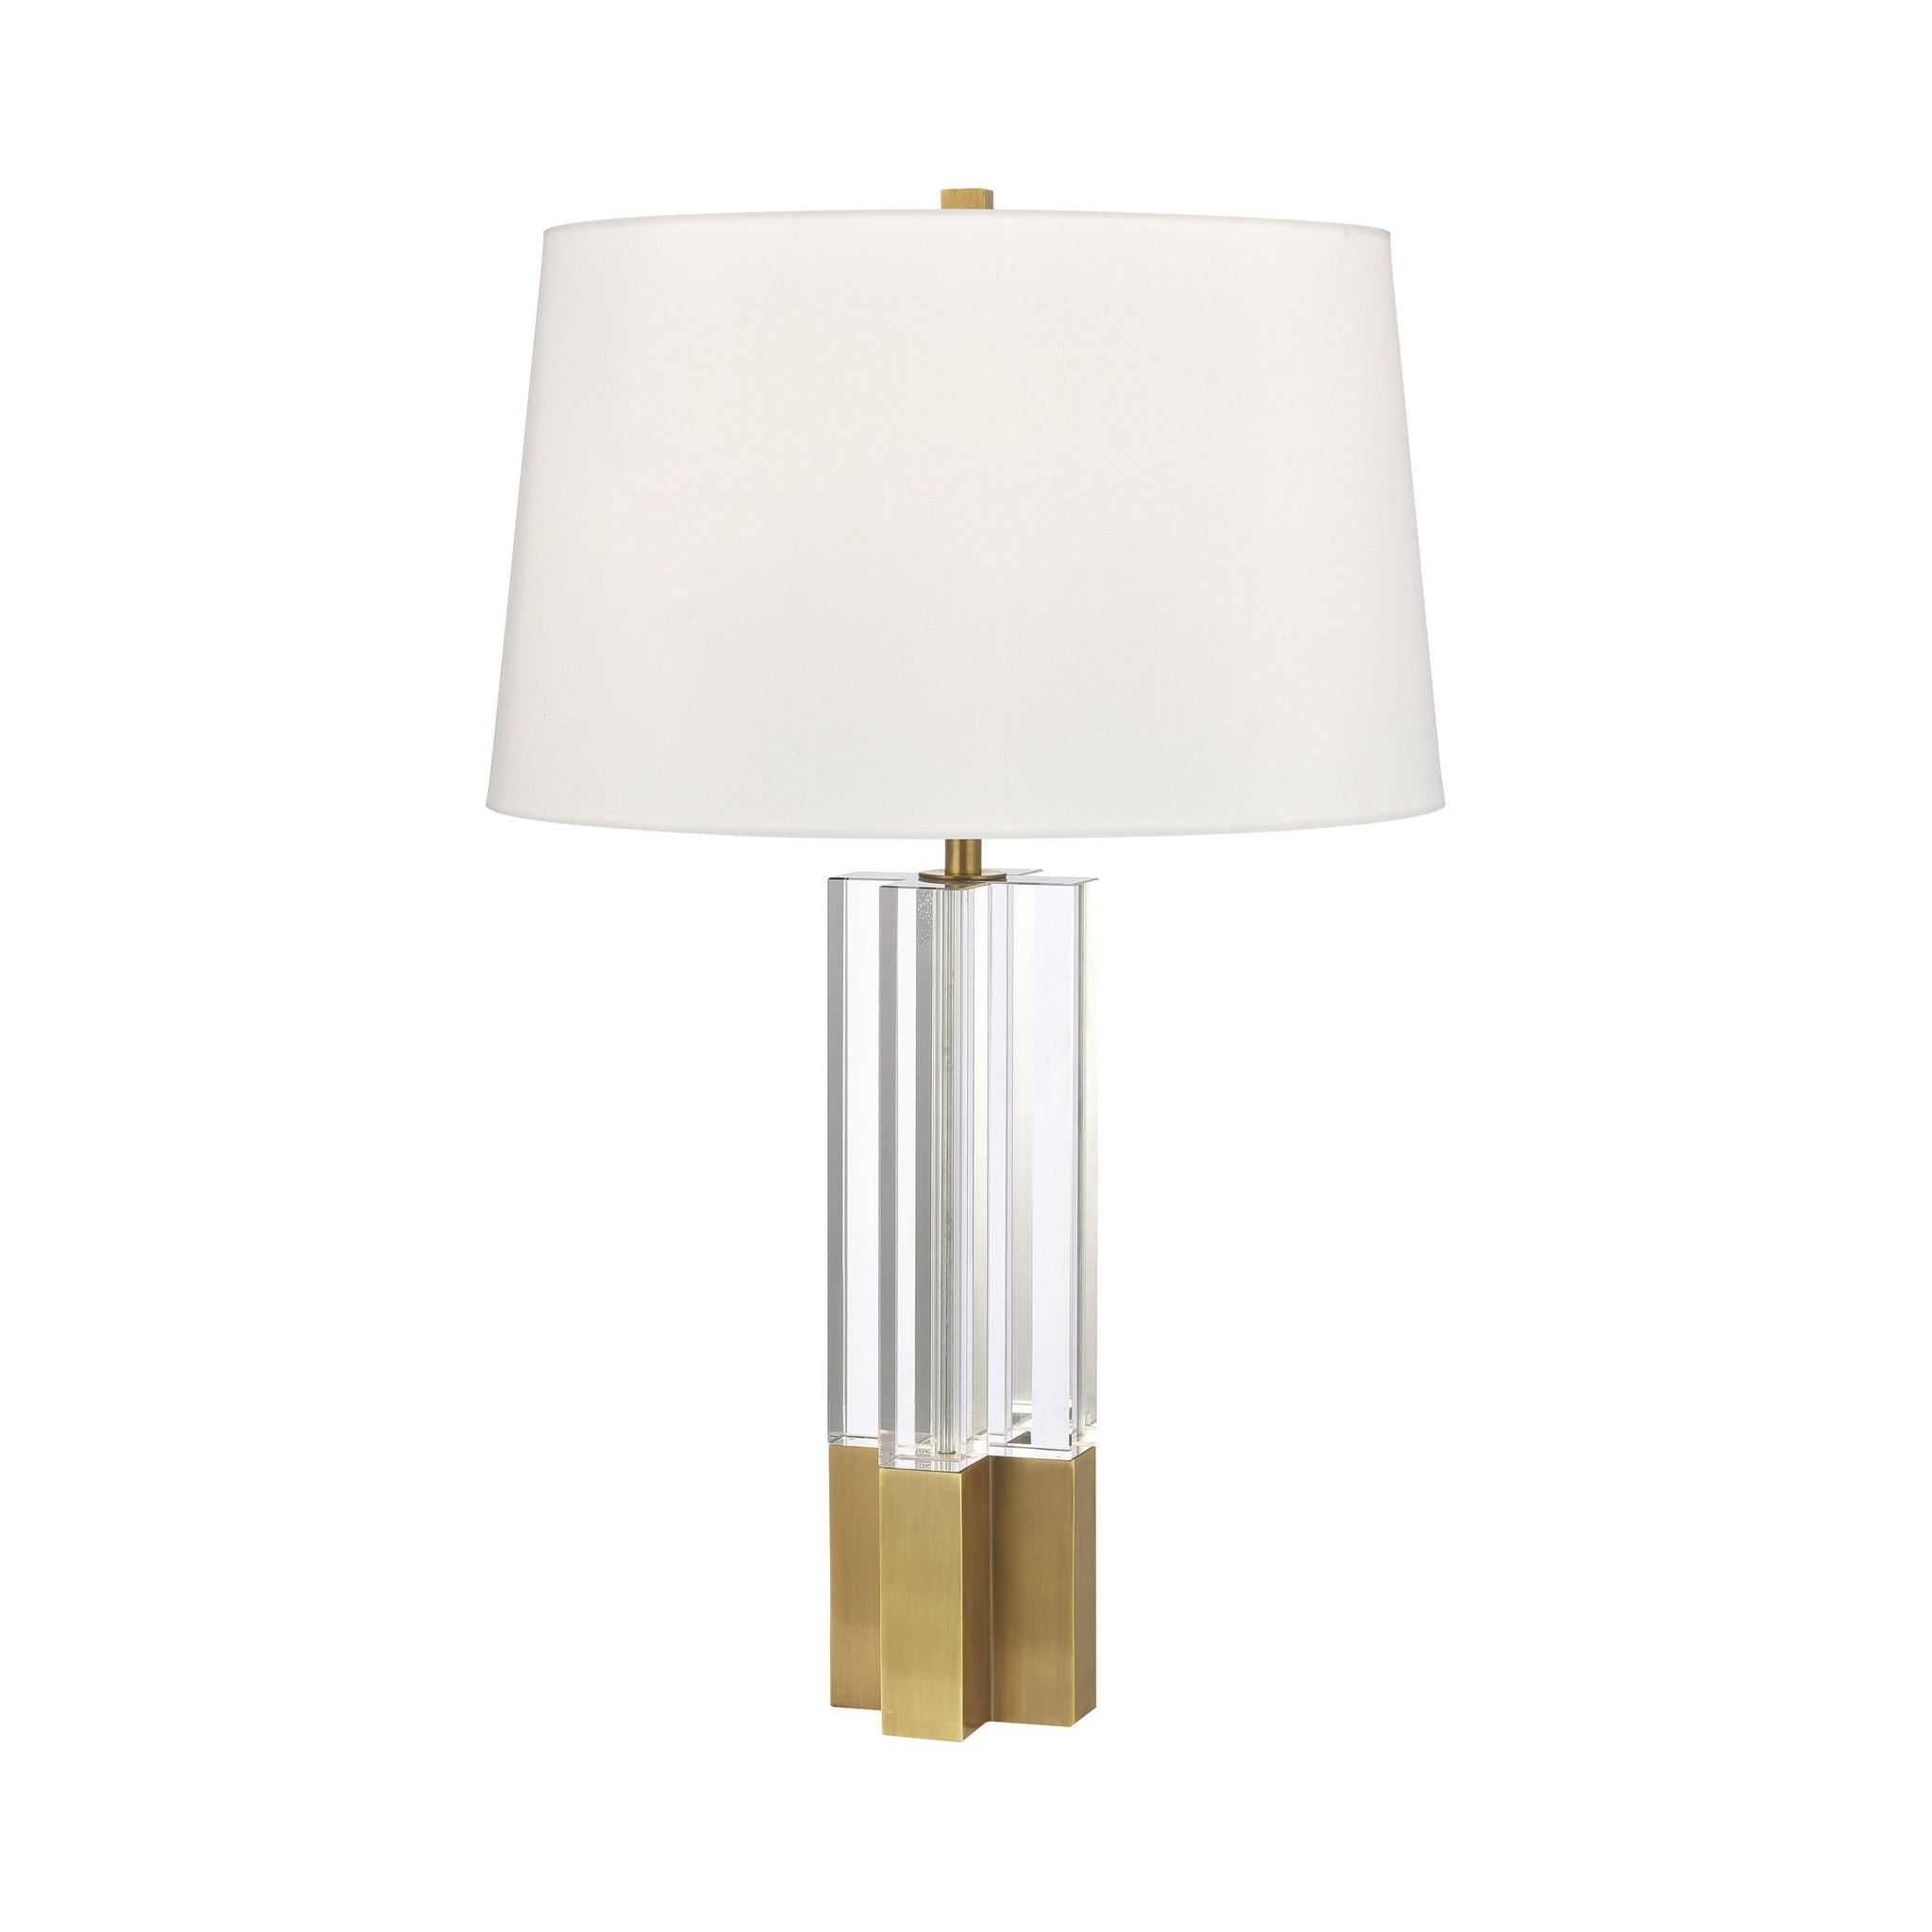 Upright 27" High 1-Light Table Lamp